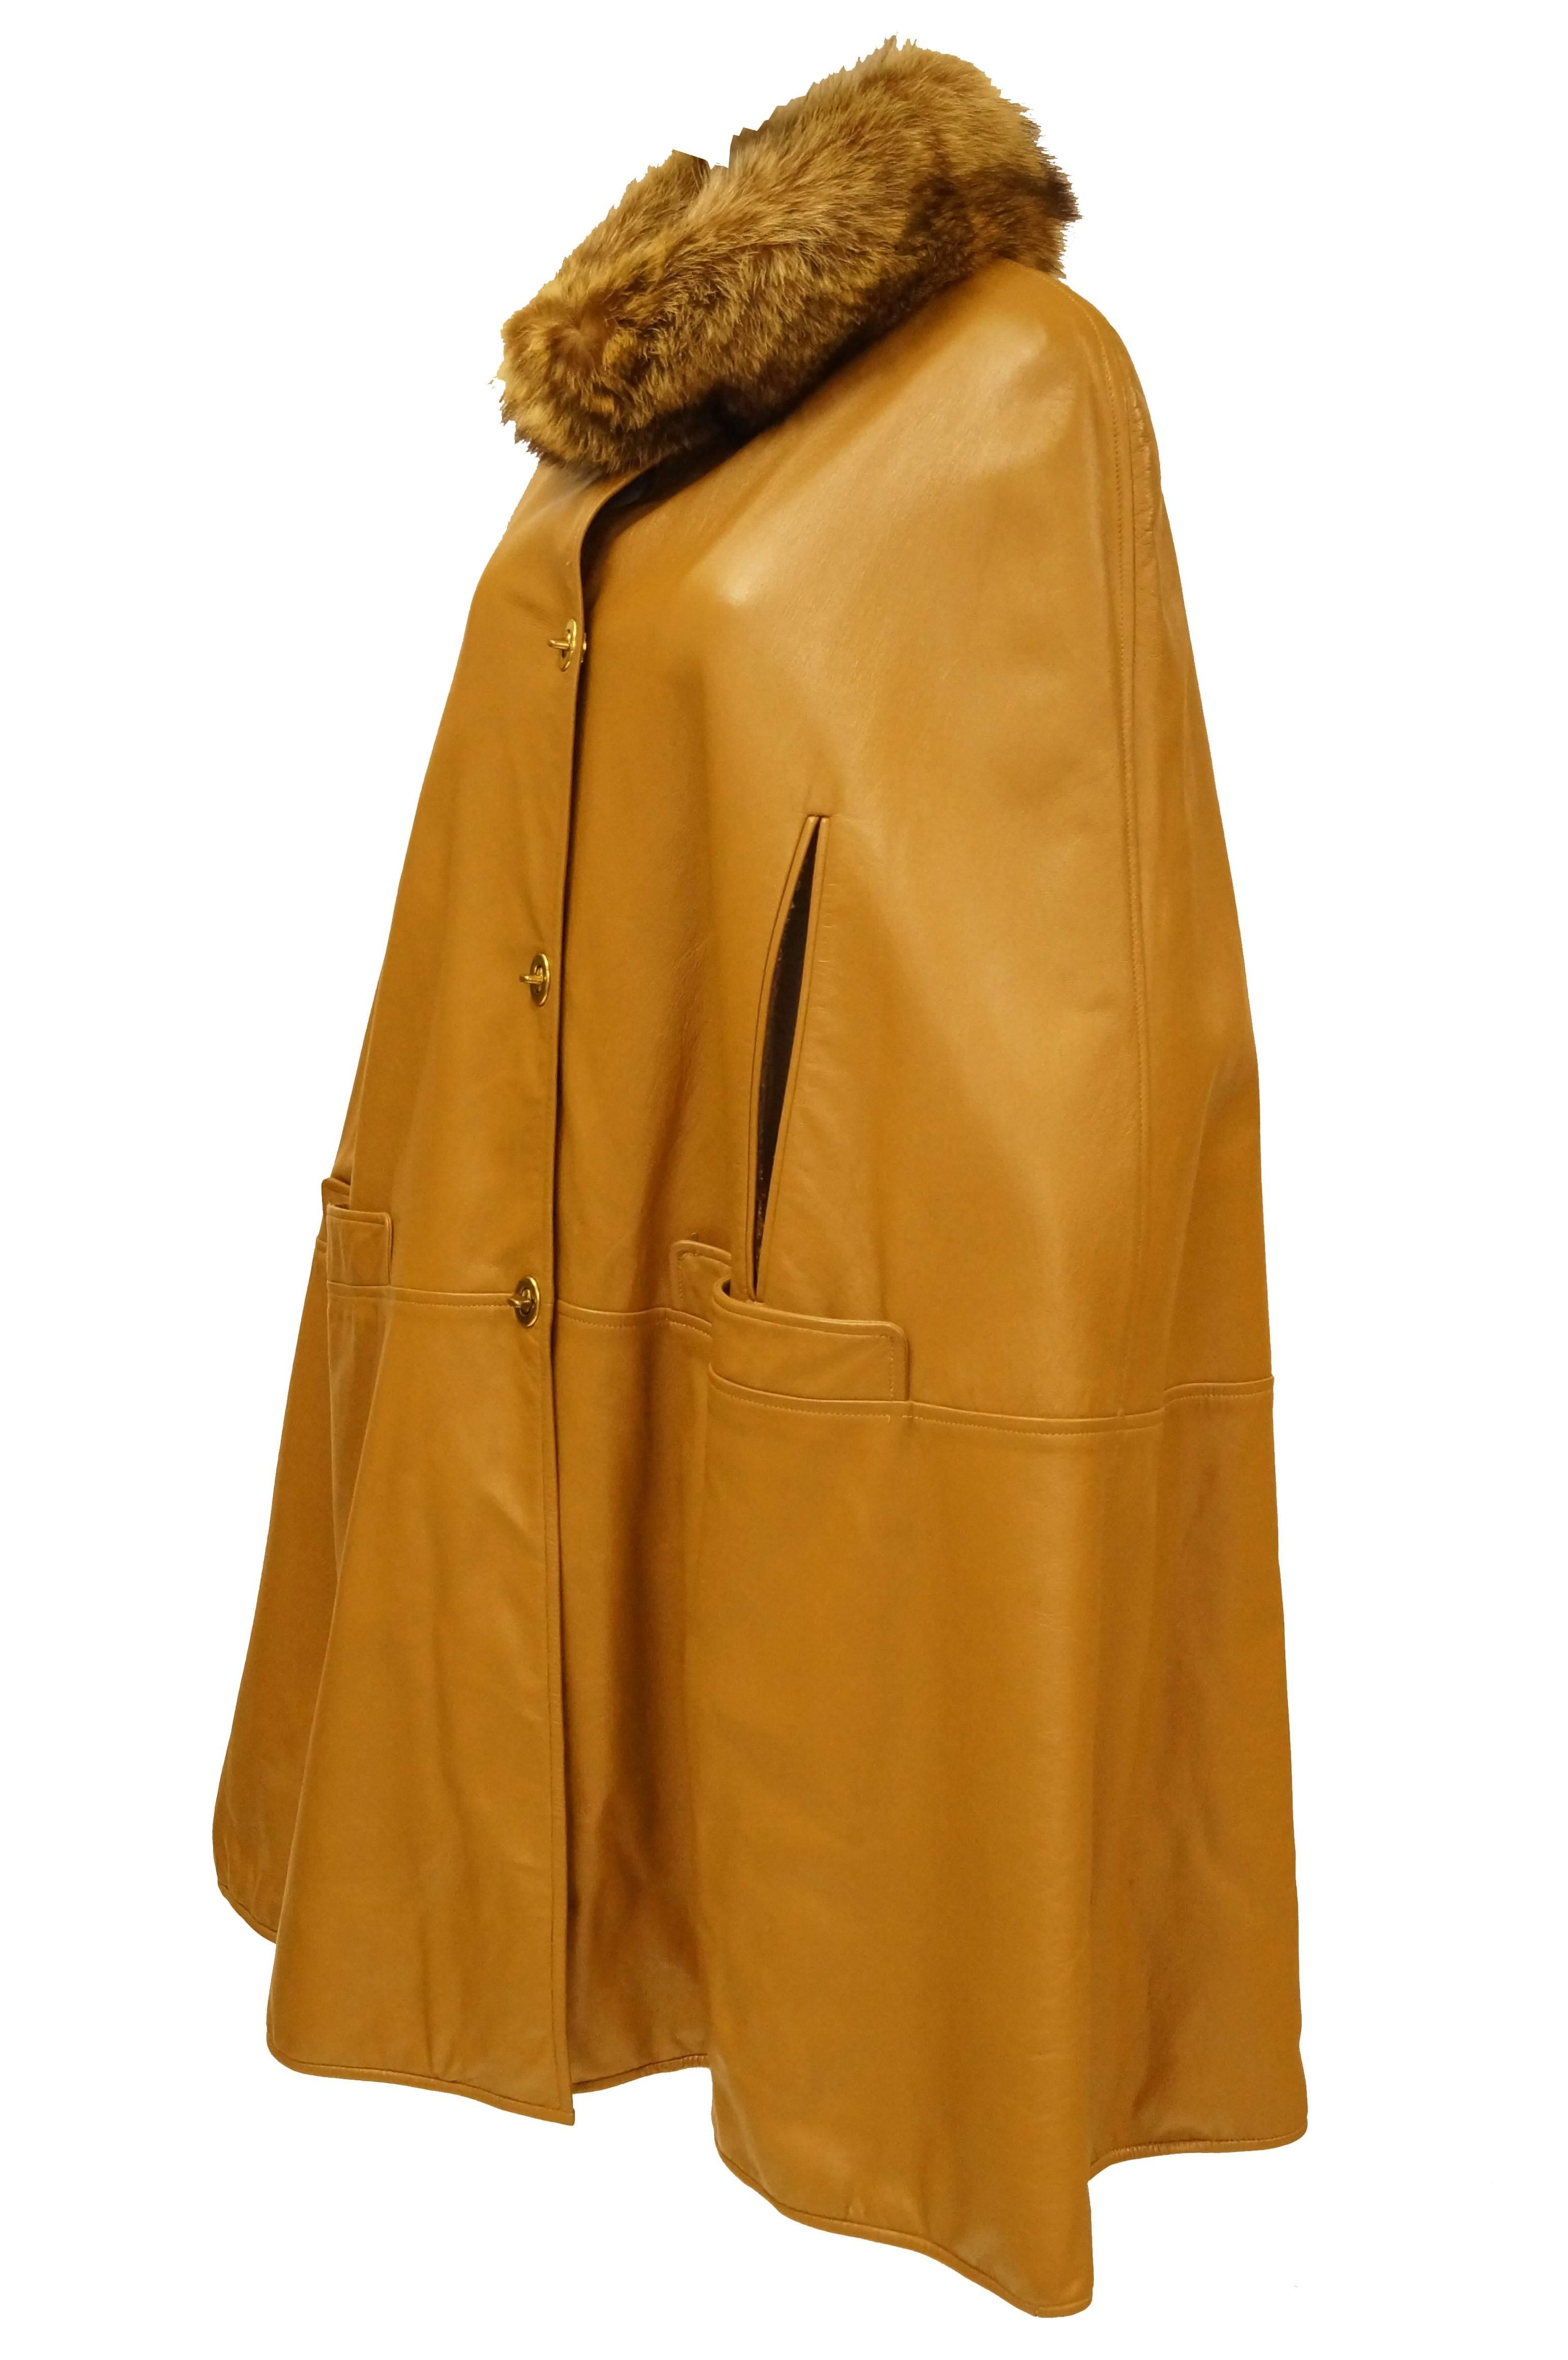 Protect yourself from the nose-bitingly cold winds of winter with the plush fur collar on this fantastic camel colored leather cape by Bonnie Cashin. The cape itself -
with its glossy, smooth finish - is stunning. The cape is thigh-length, with arm